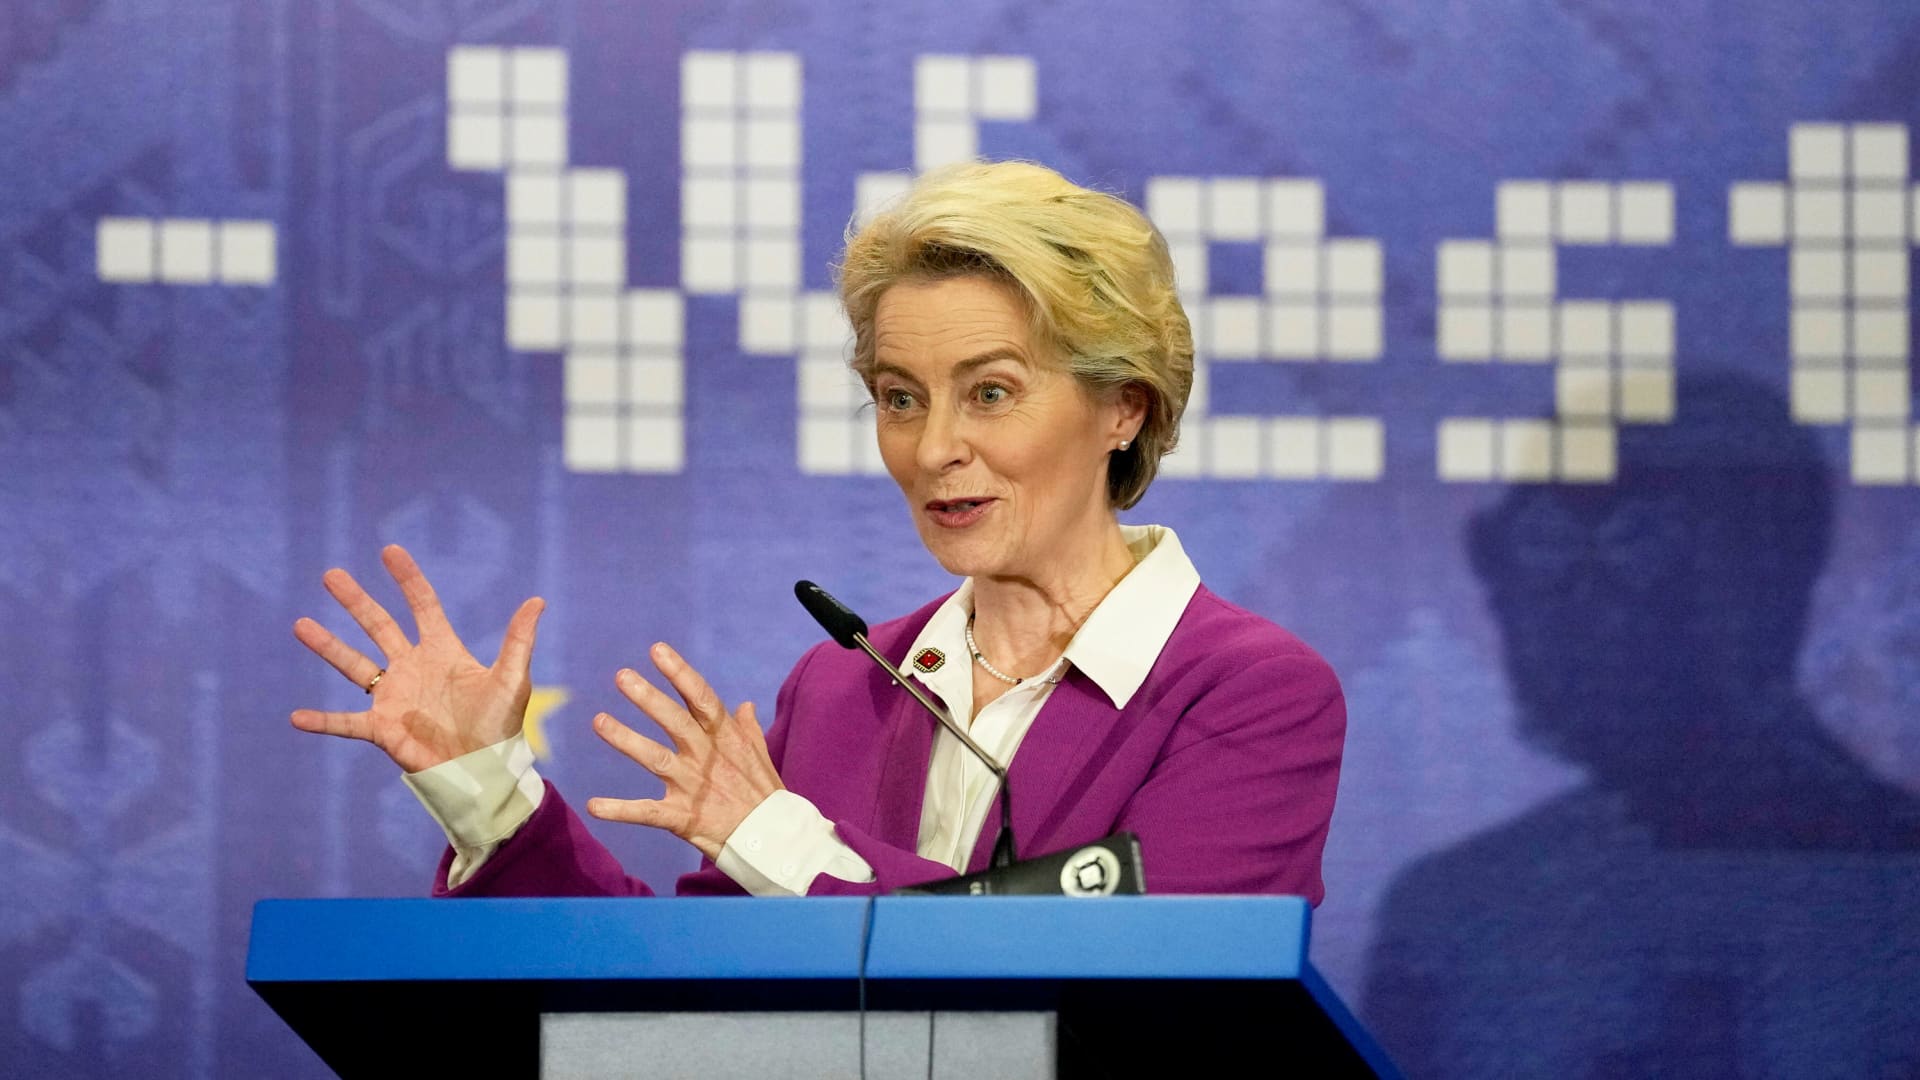 European Commission President Ursula von der Leyen speaks during a media conference at the EU-Western Balkans Summit, in Tirana, Albania, Tuesday, Dec. 6, 2022. EU leaders and their Western Balkans counterparts gathered Tuesday for talks aimed at boosting their partnership as Russia's war in Ukraine threatens to reshape the geopolitical balance in the region.